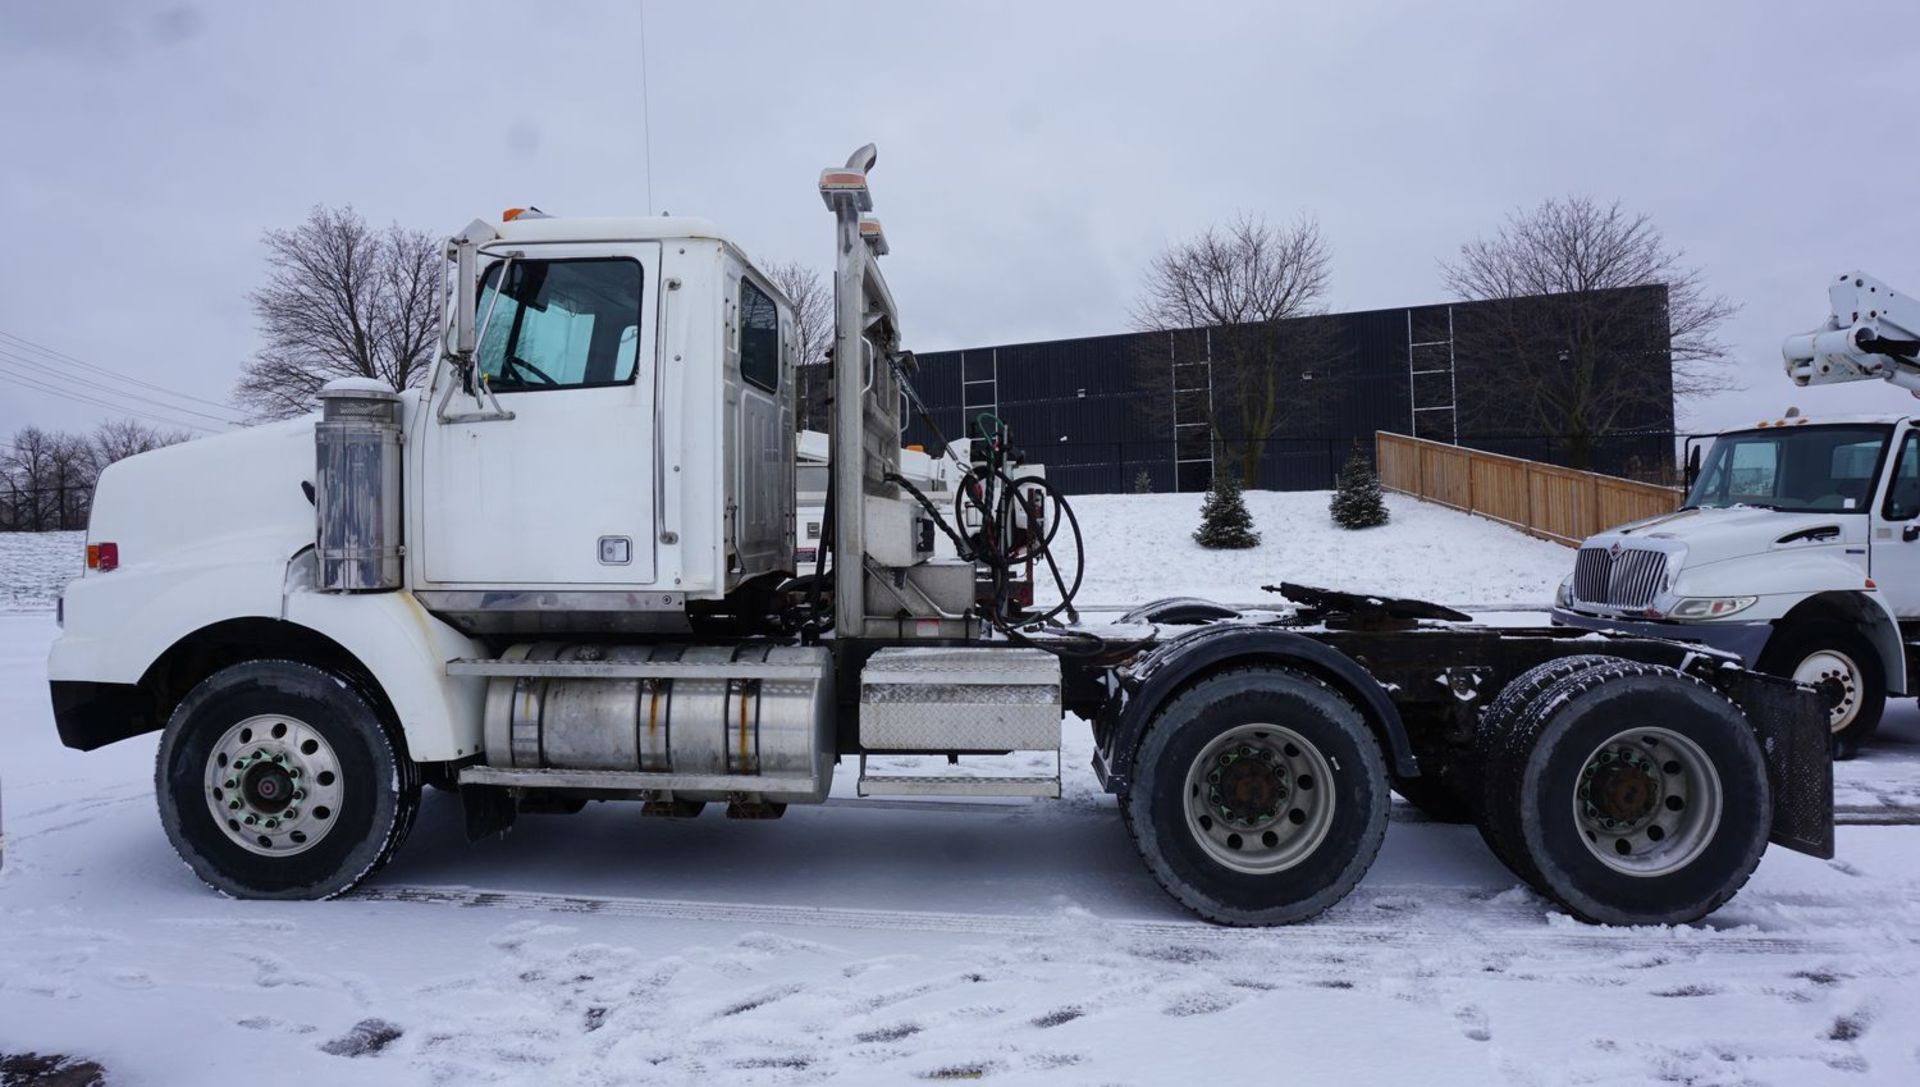 2002 WESTERN STAR 4900 CONVENTIONAL CAB TRUCK W/ DETROIT 12.7 L ENGINE, EATON FULLER 18-SPEED TRANS